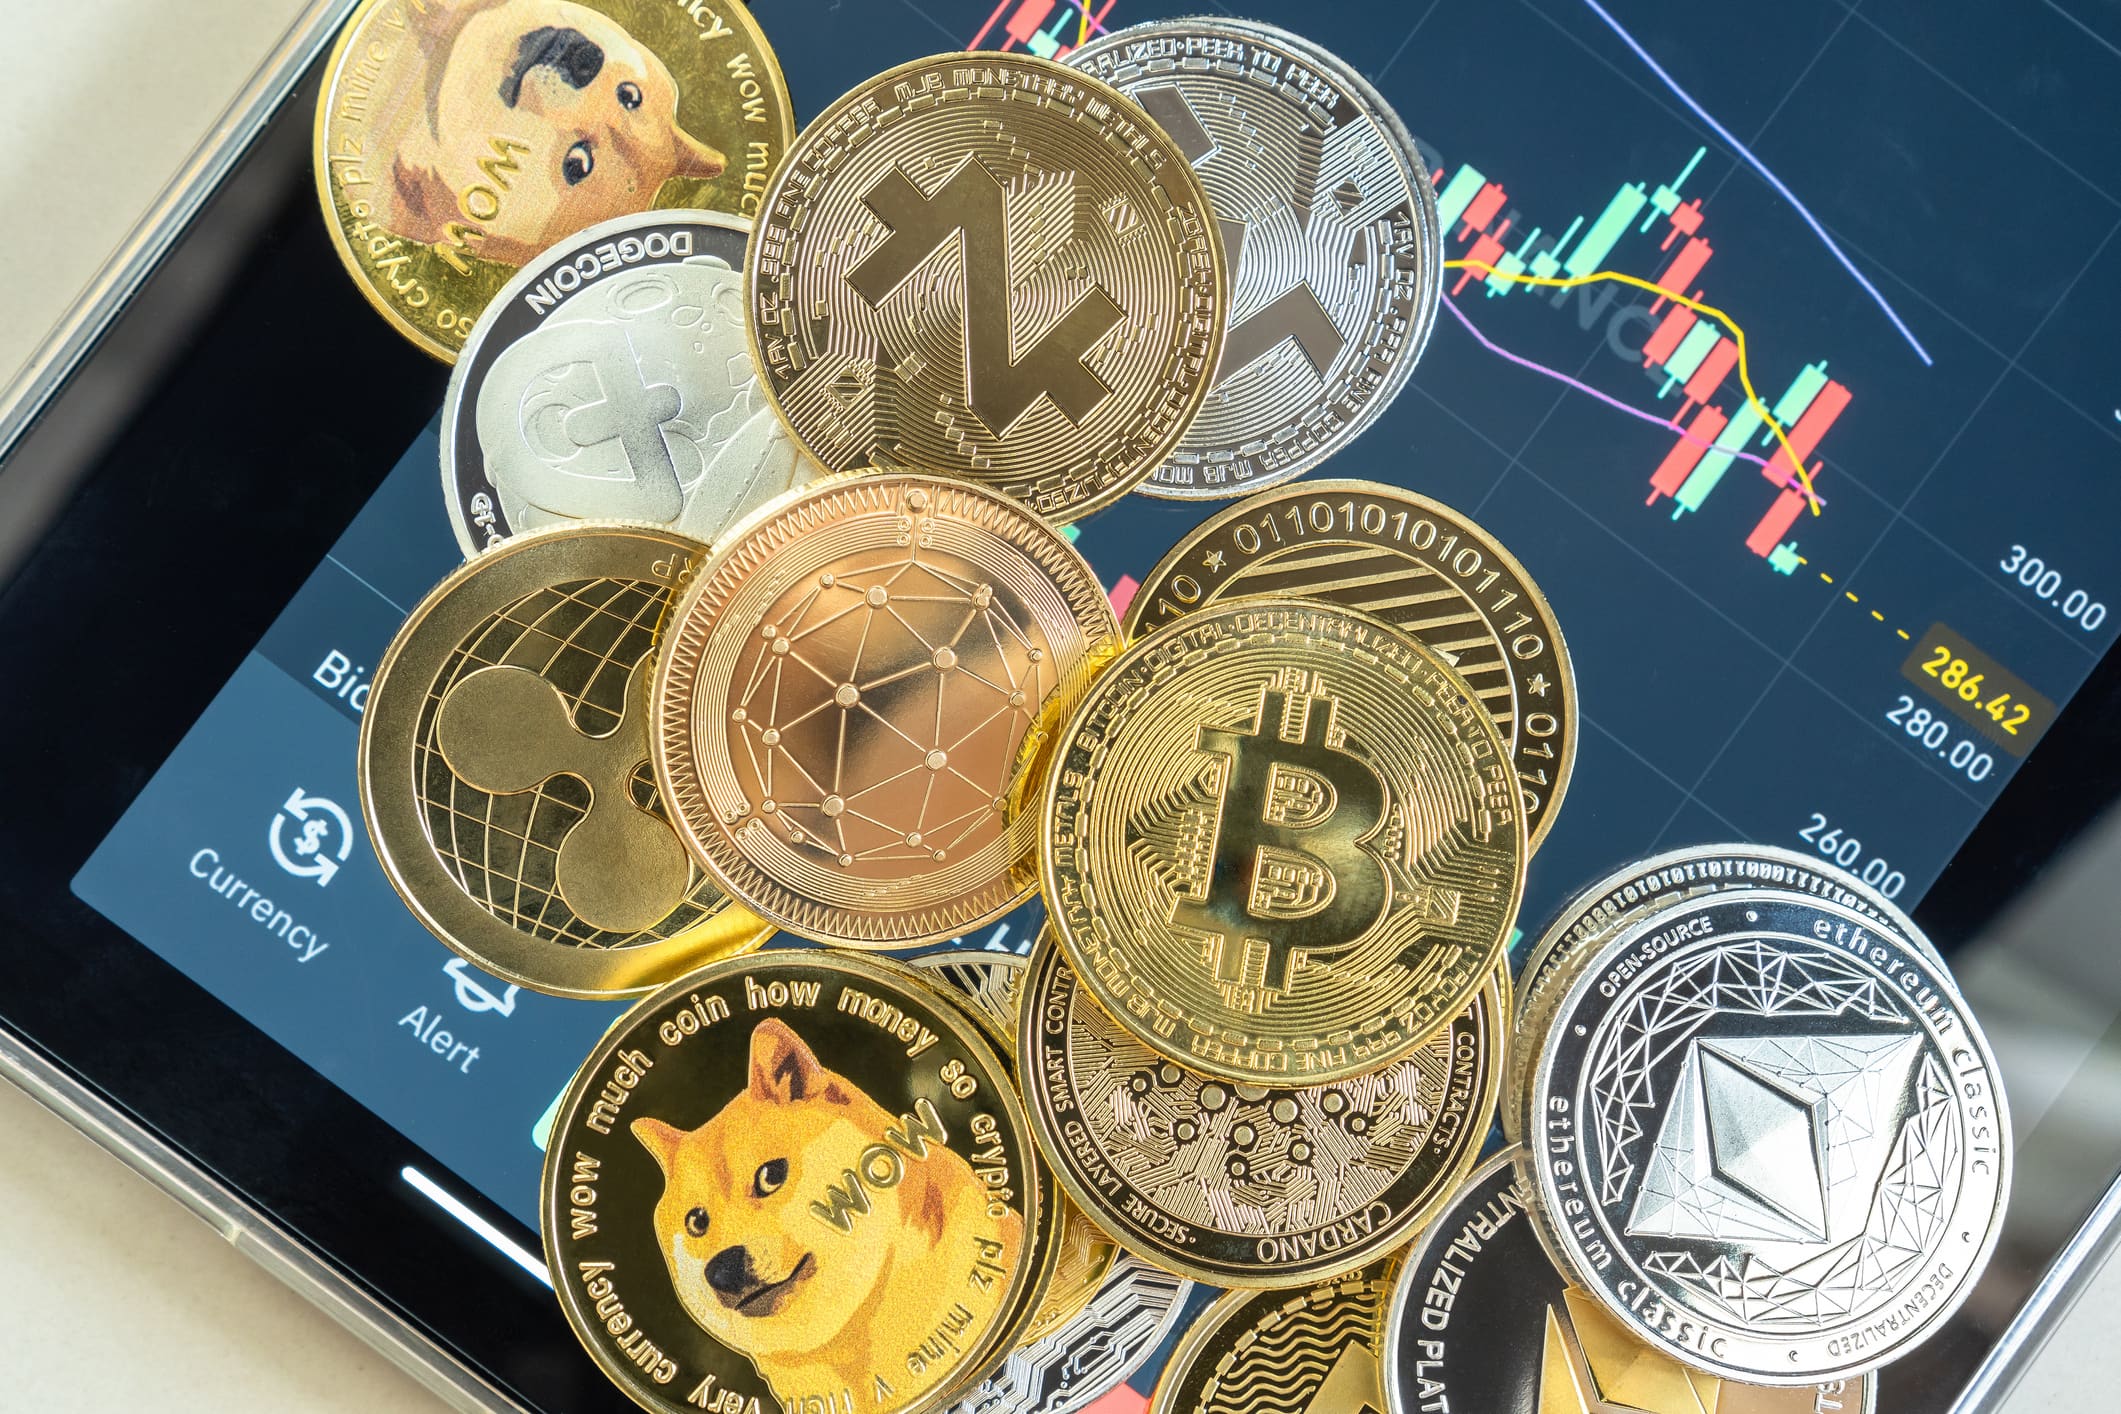 When it comes to cryptocurrency, should you invest in one or multiple